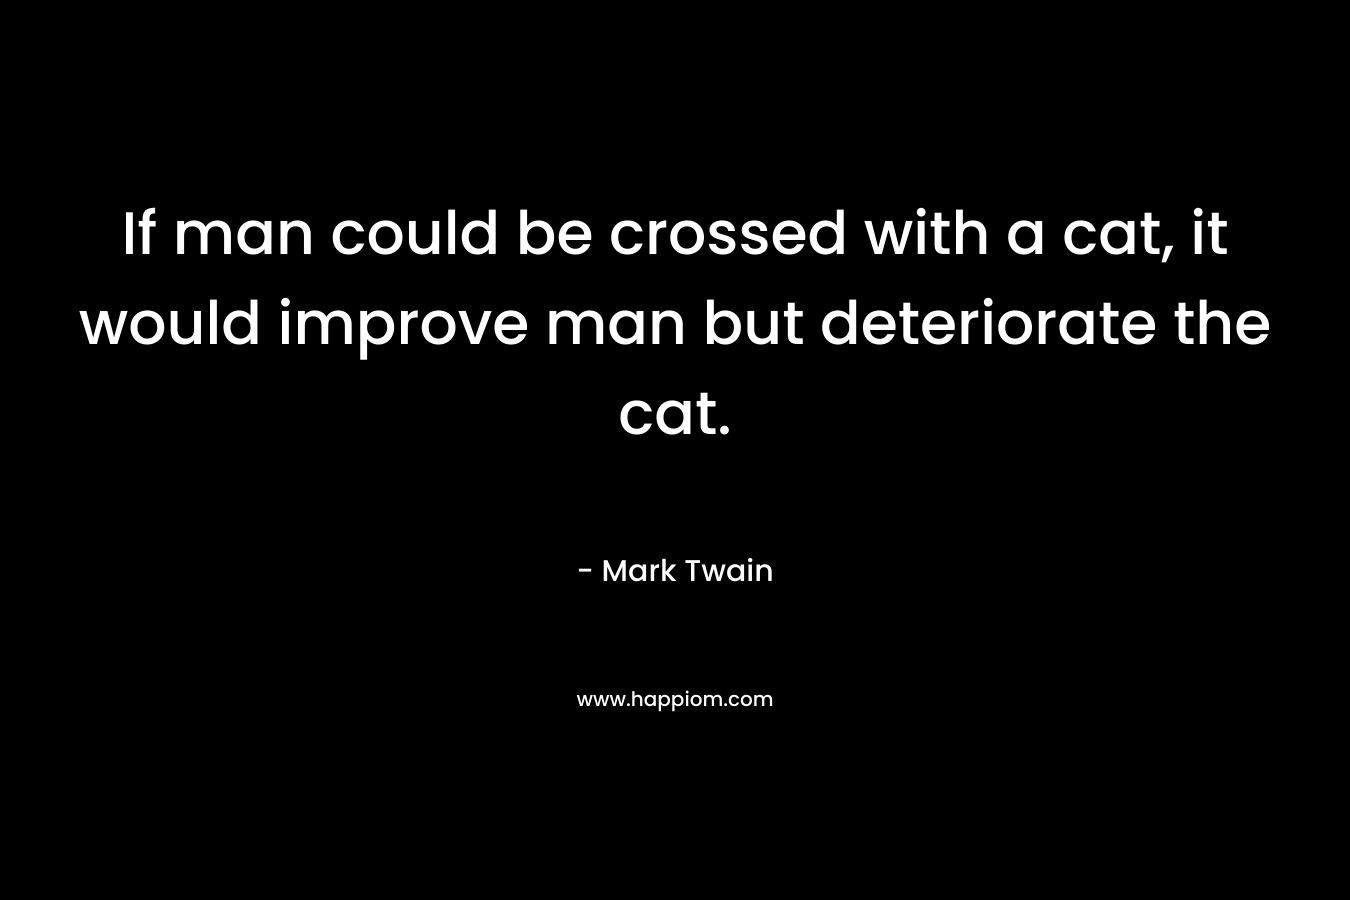 If man could be crossed with a cat, it would improve man but deteriorate the cat. – Mark Twain